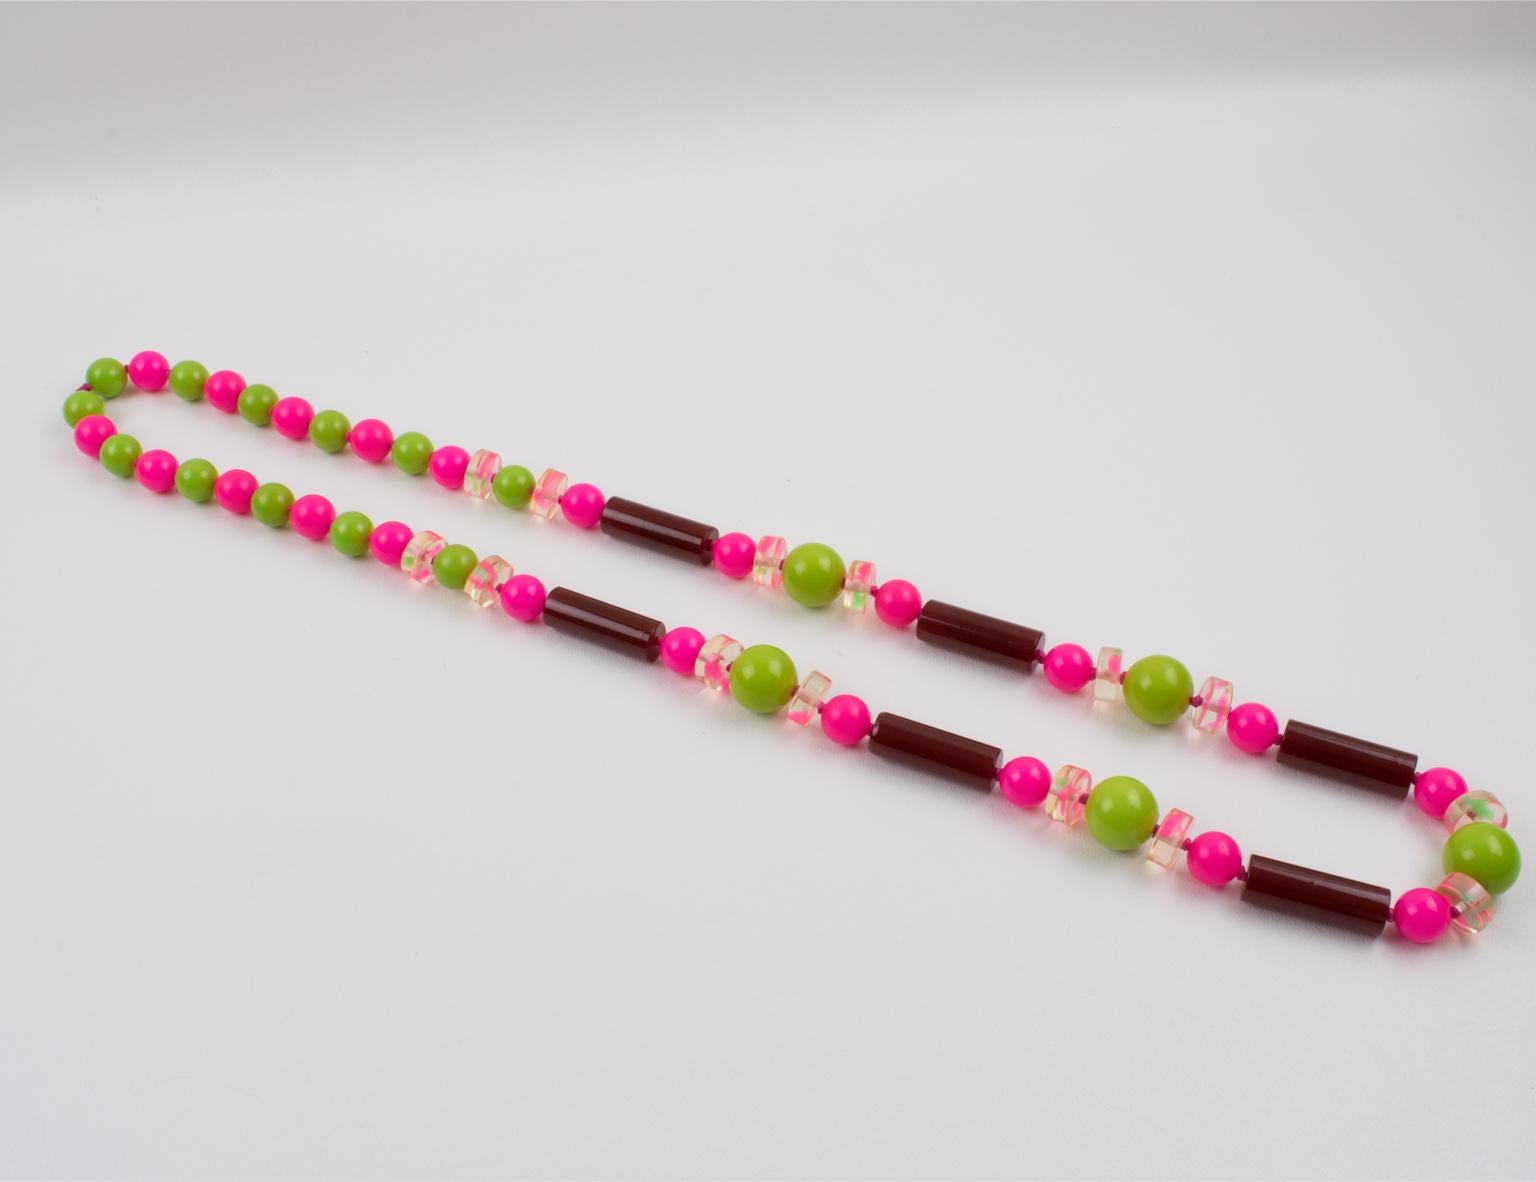 Women's or Men's Bakelite and Lucite Extra Long Necklace Burgundy, Hot Pink, Apple Green Beads For Sale